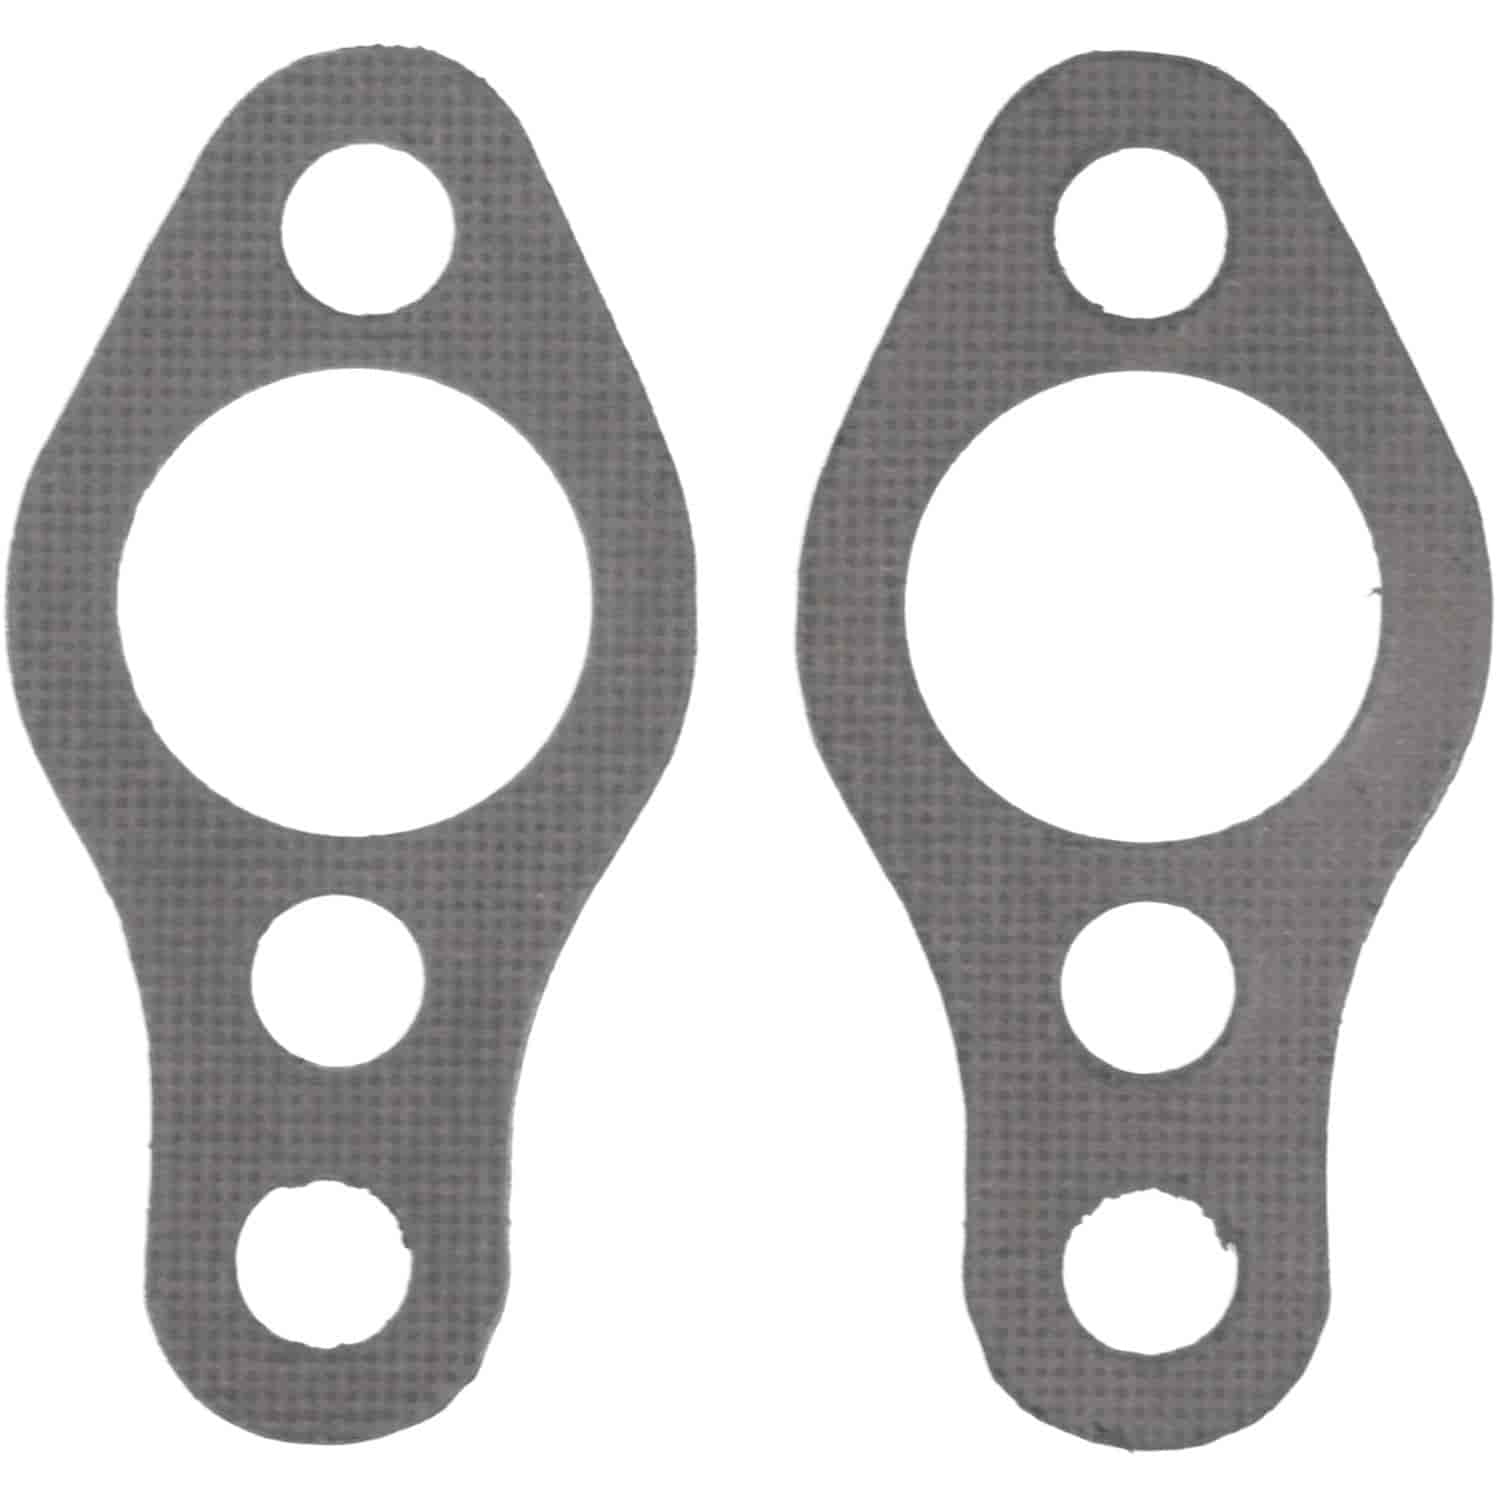 Water Pump Gasket 1968-1989 Small Block Chevy 262/267/305/307/350/400 ; Chevy 90 Degree V6 200/229/262